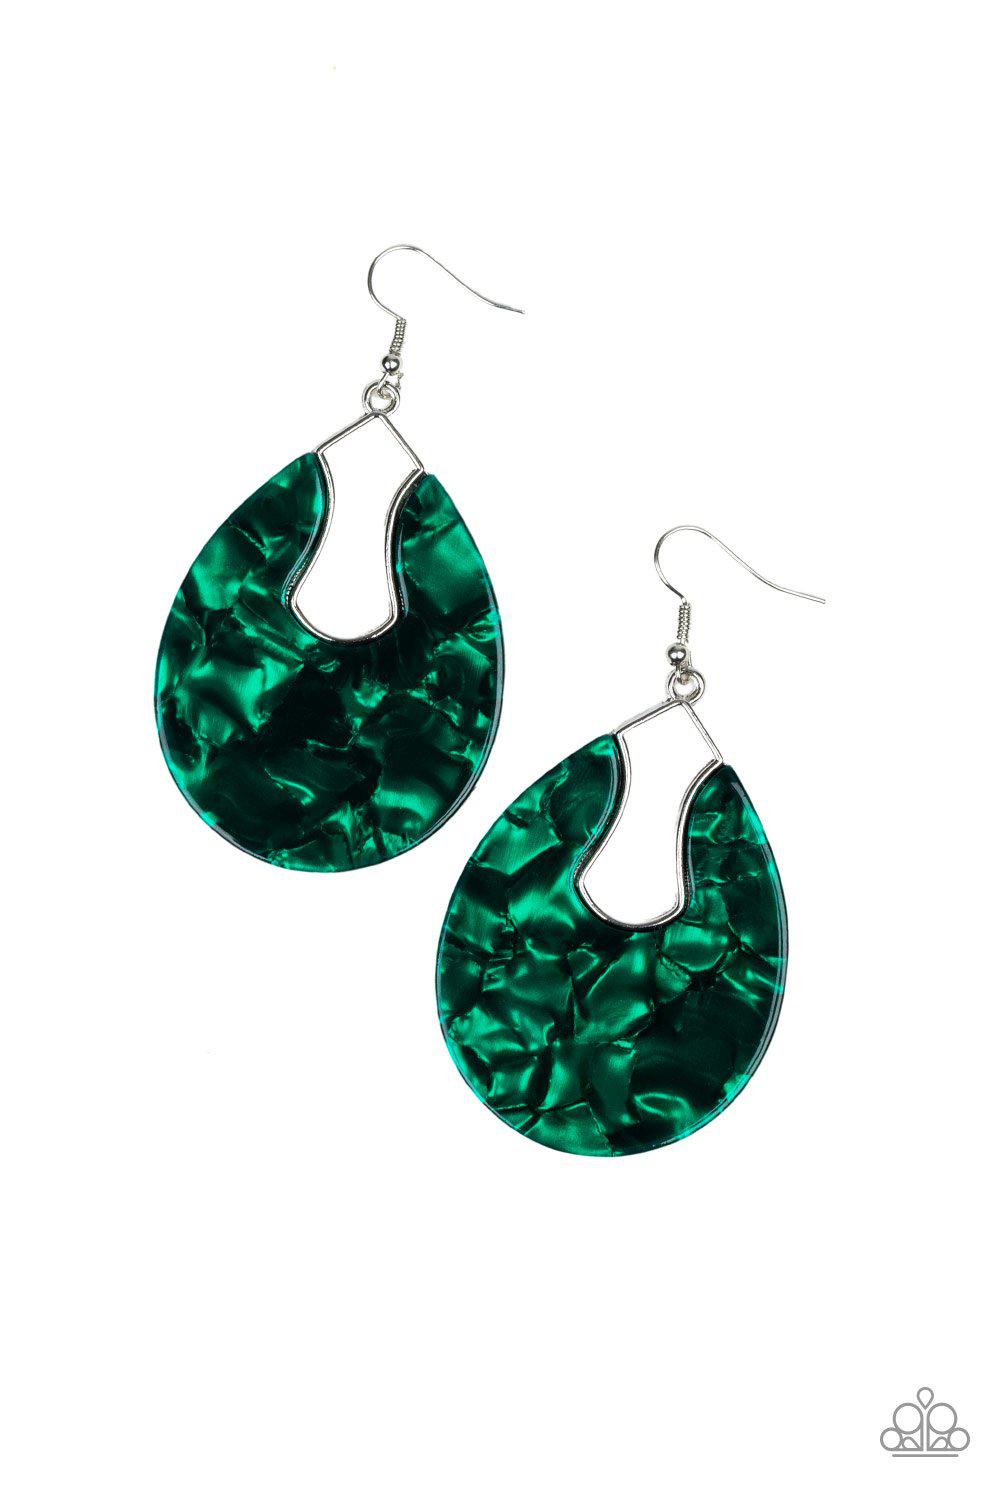 Pool Hopper Green Acrylic Marble Earrings - Paparazzi Accessories-CarasShop.com - $5 Jewelry by Cara Jewels